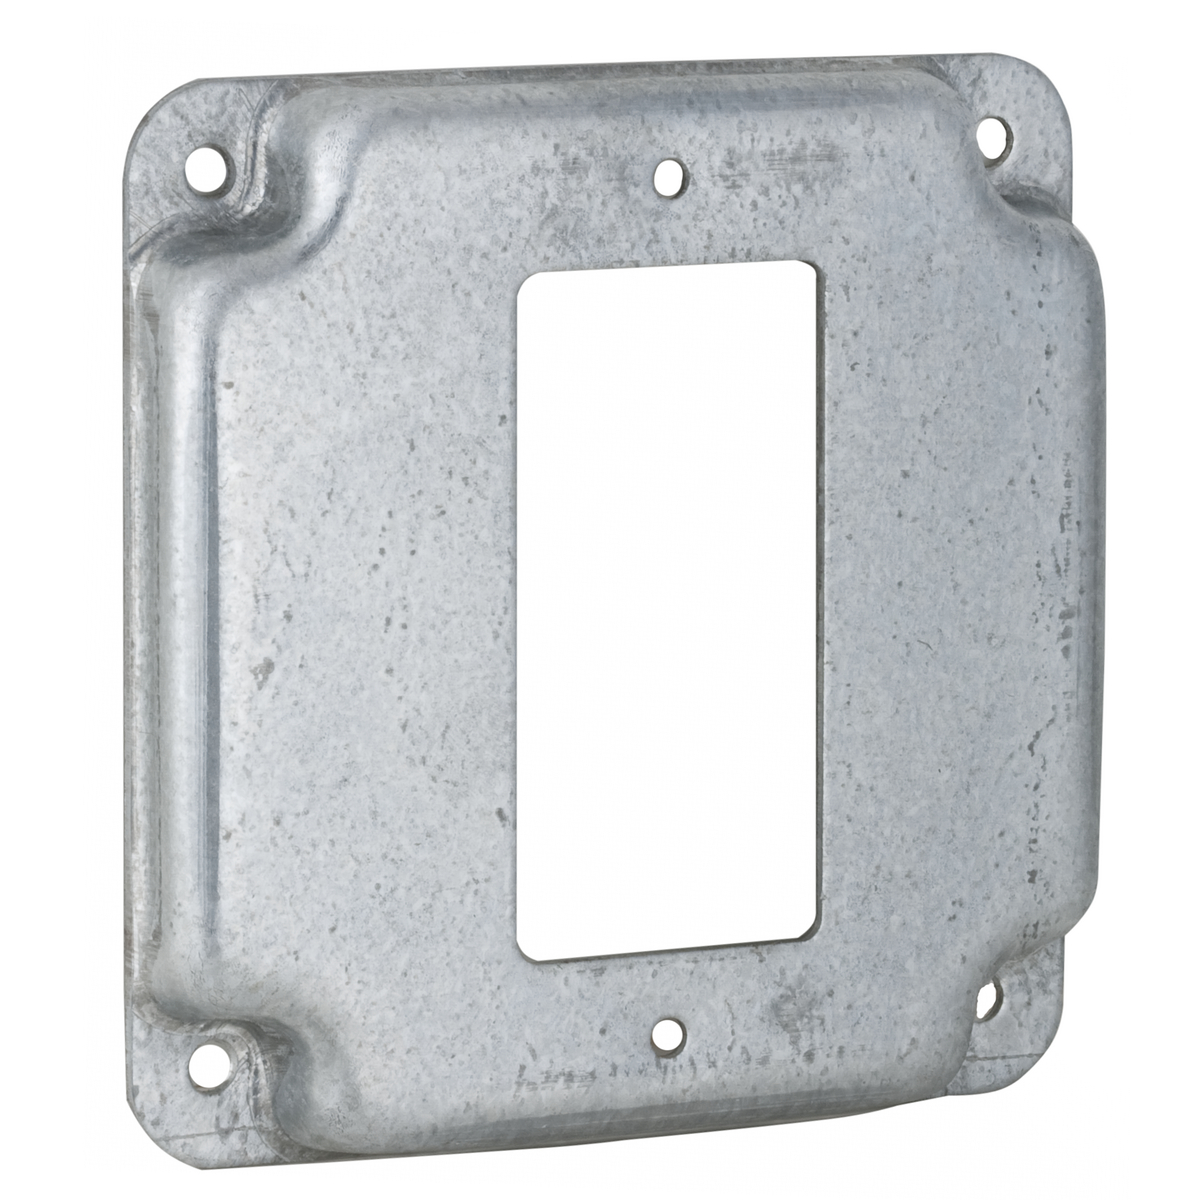 RACO 808C 4" SQUARE WORK COVER